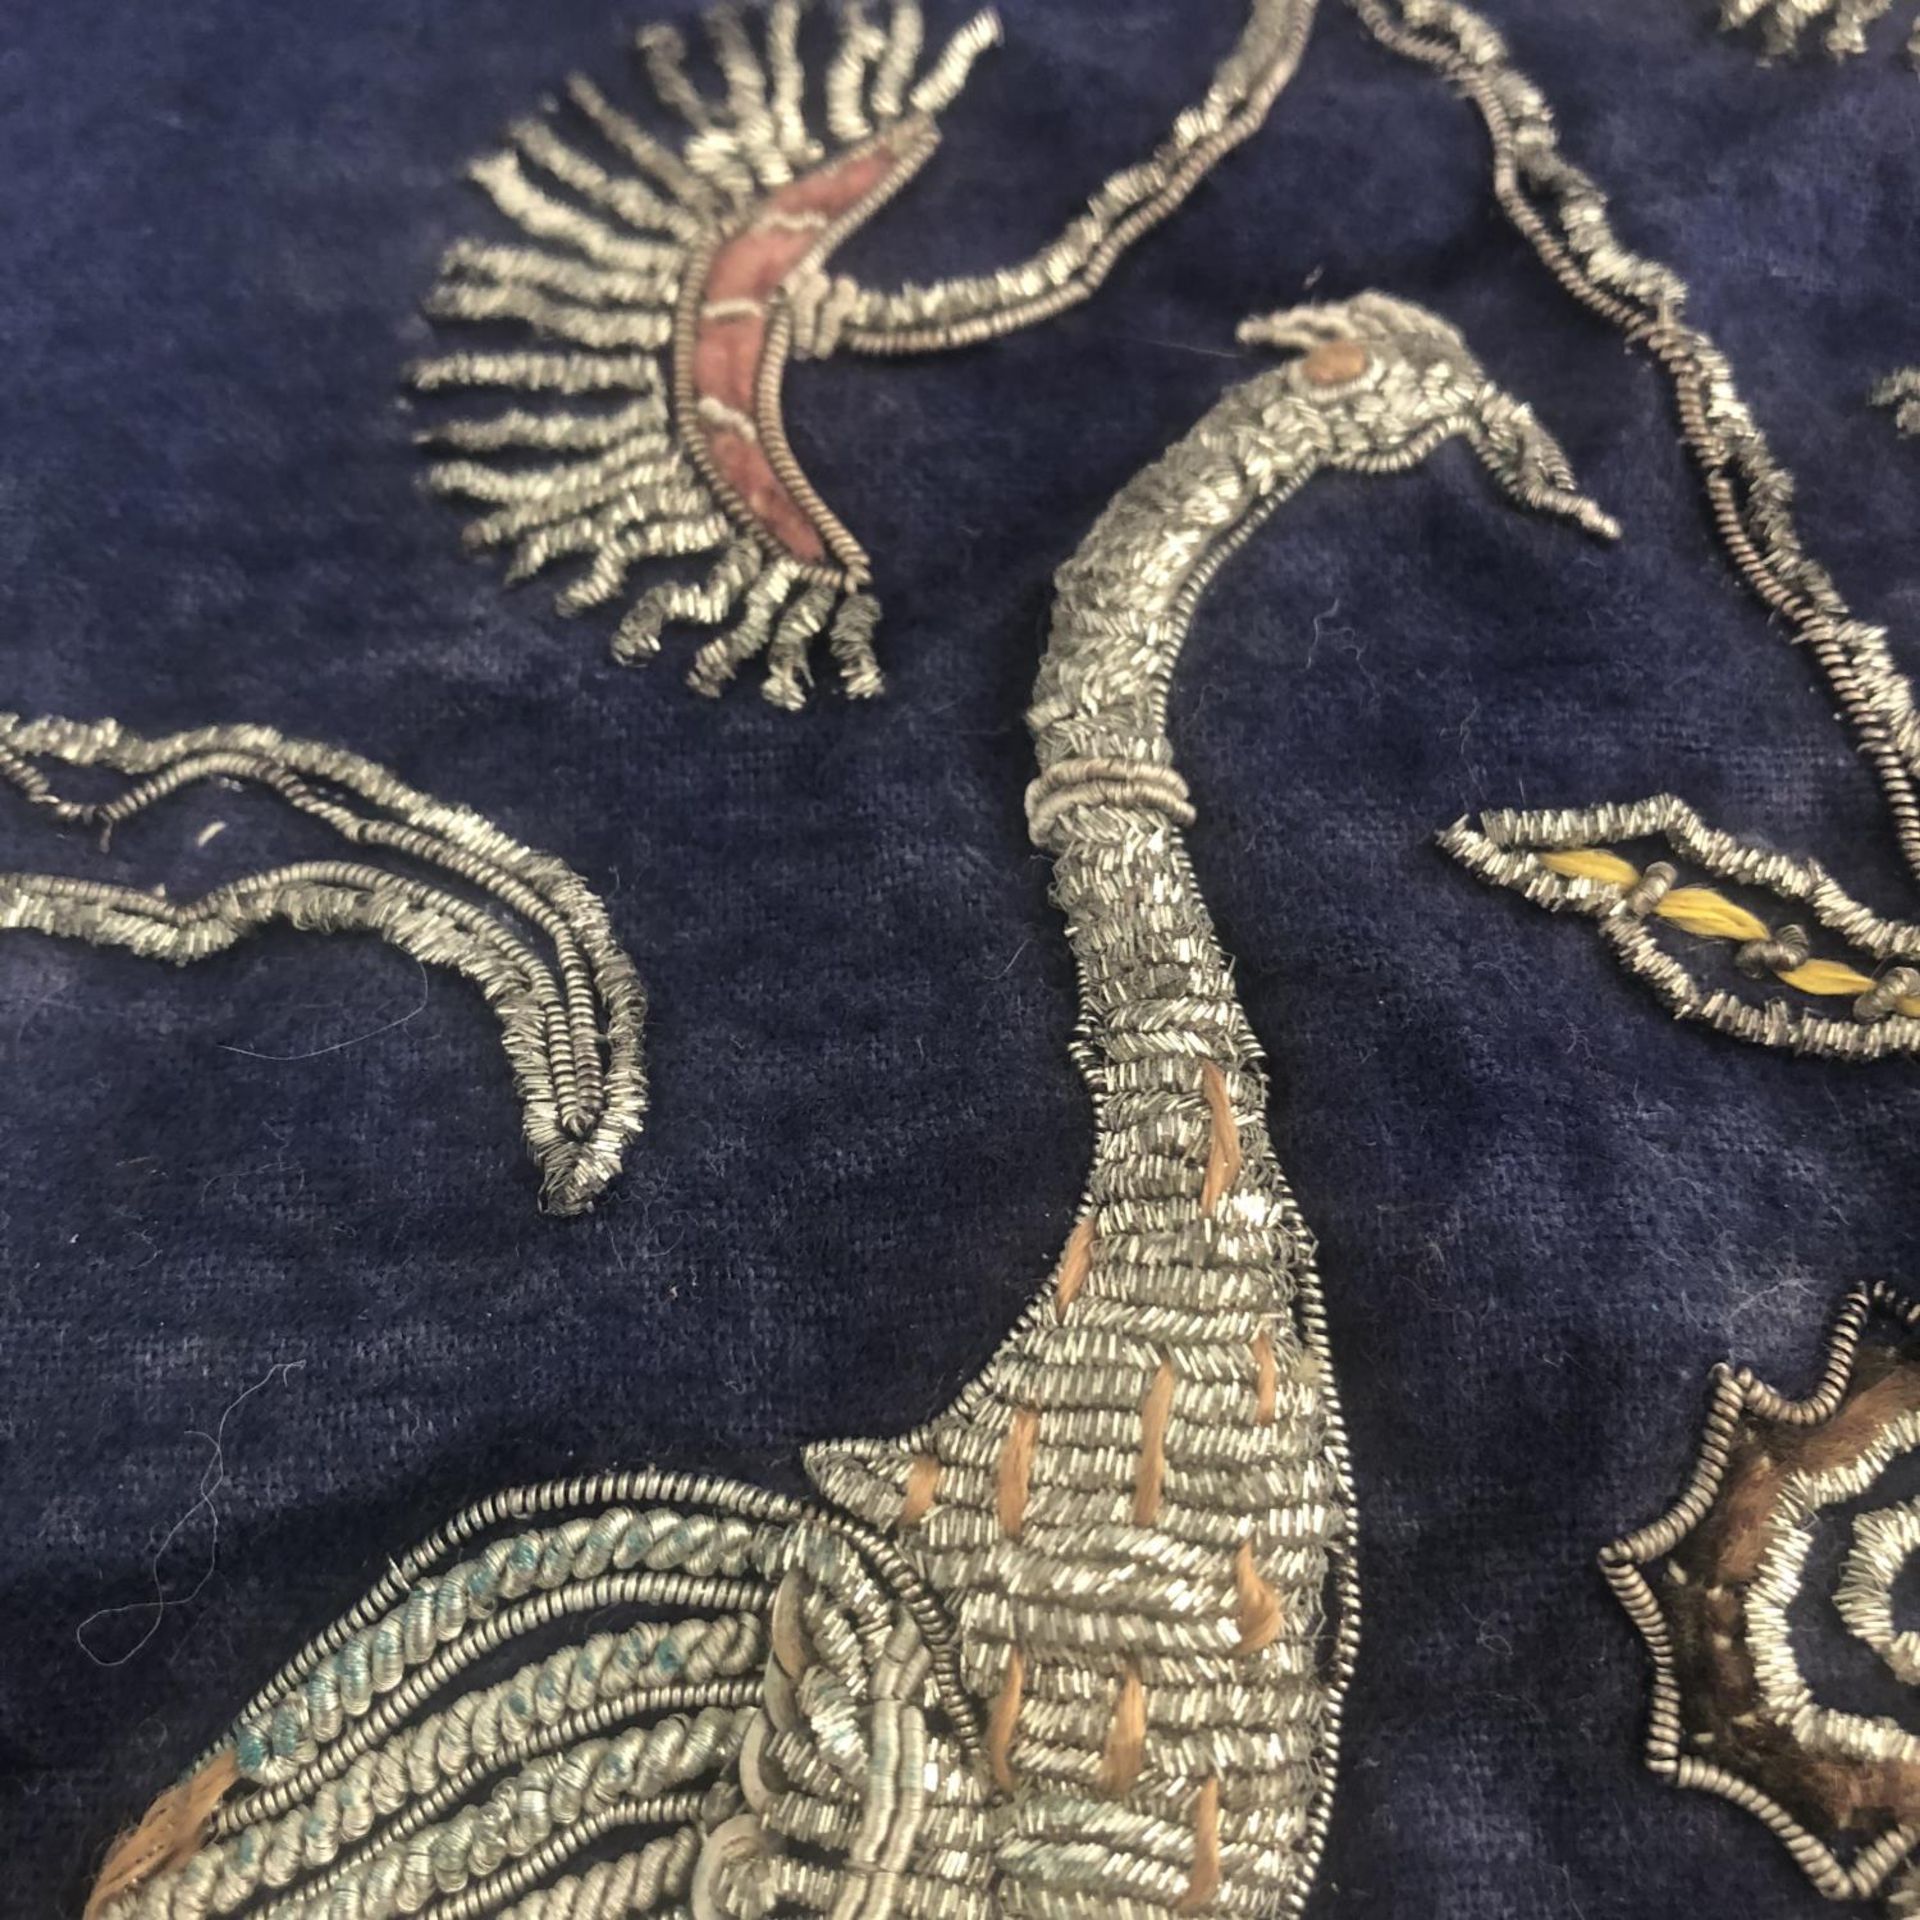 Antique Indian Hand Embroidered Fabric - Peacocks, Urn, India - Metallic Threads - Image 3 of 5